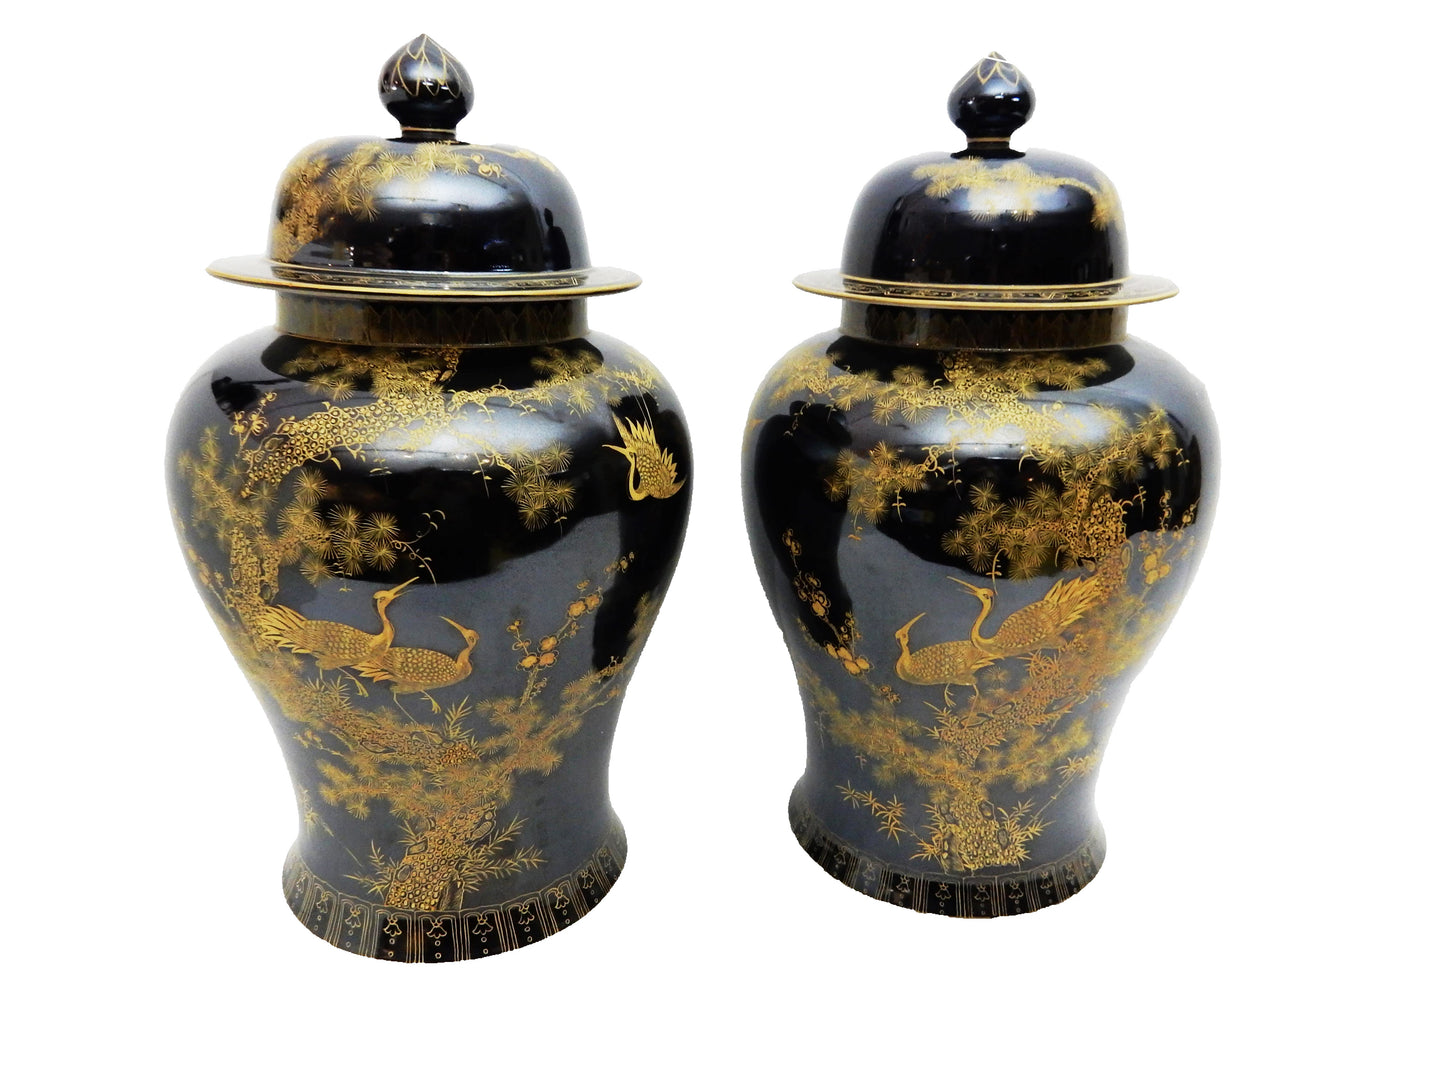 #5784 Chinoiserie Famille Noire Porcelain Ginger Jars - a Pair 22.5" H